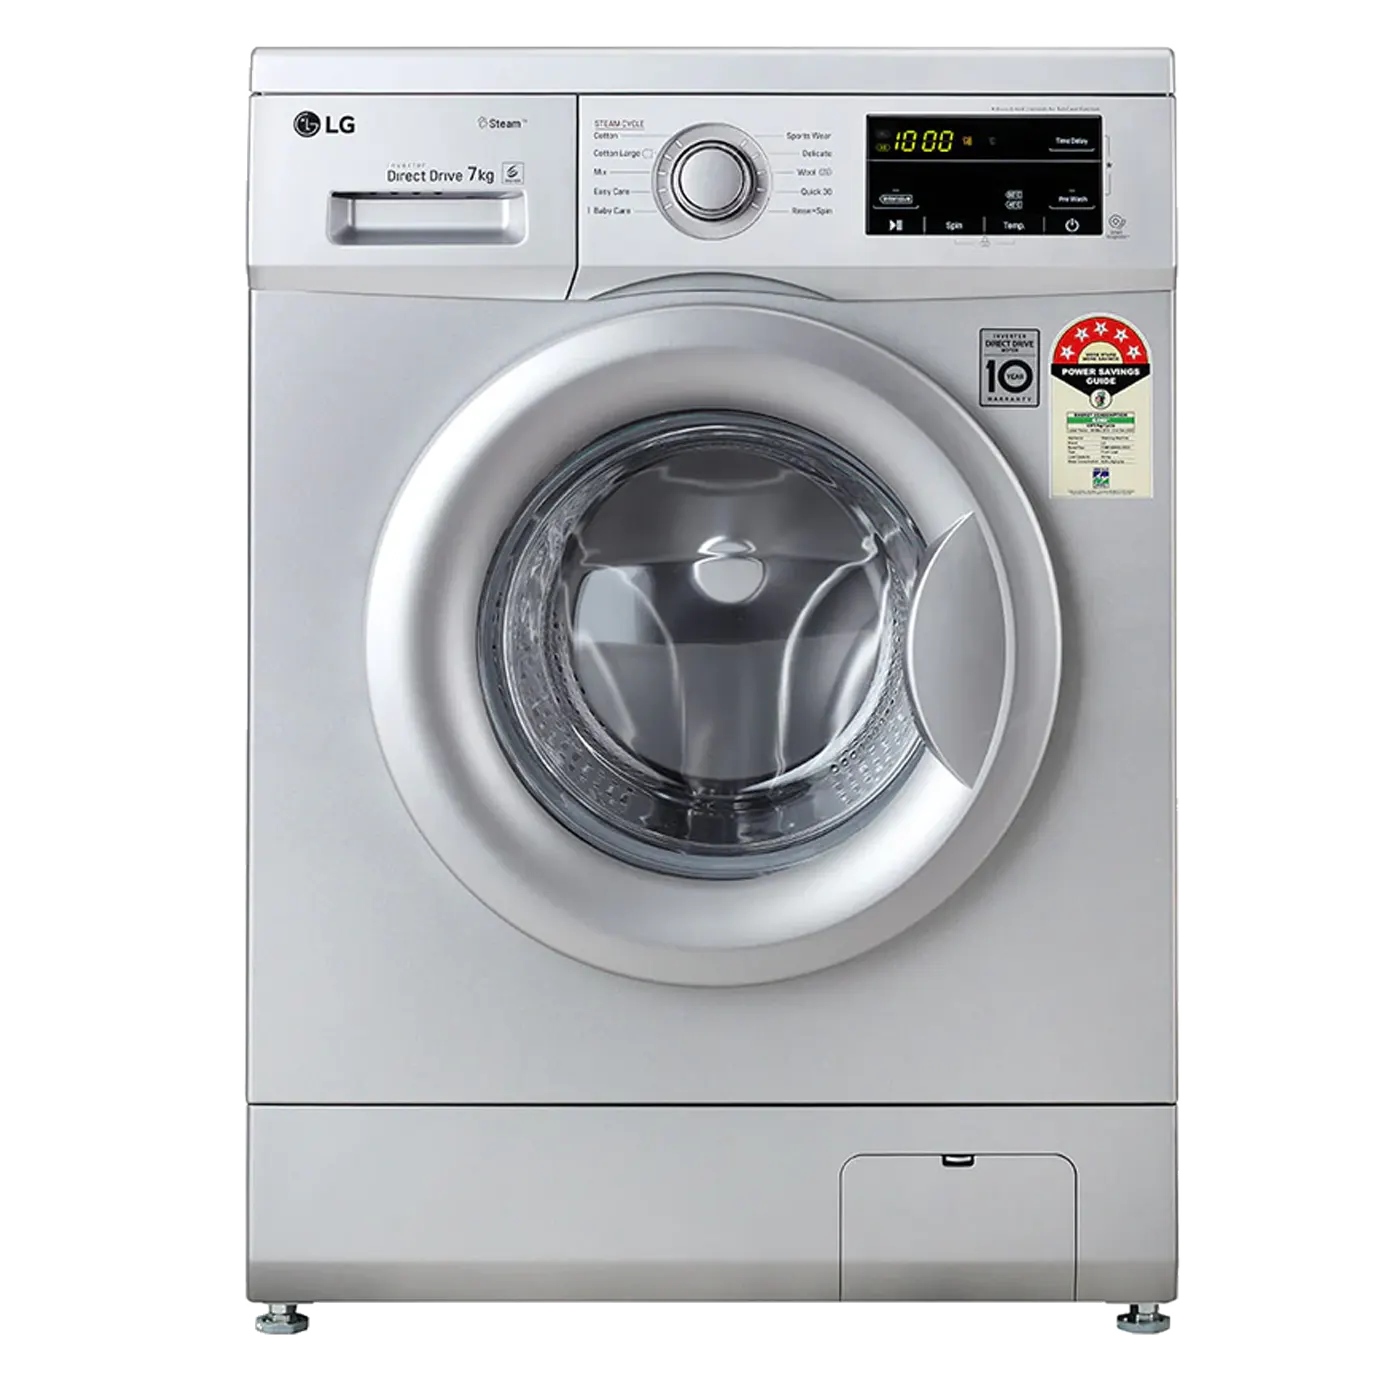 LG - 7.0 kg 5 Star Inverter Touch Control Fully-Automatic Front Load Washing Machine with Heater (FHM1207SDL, Silver, 6 Motion Direct Drive)